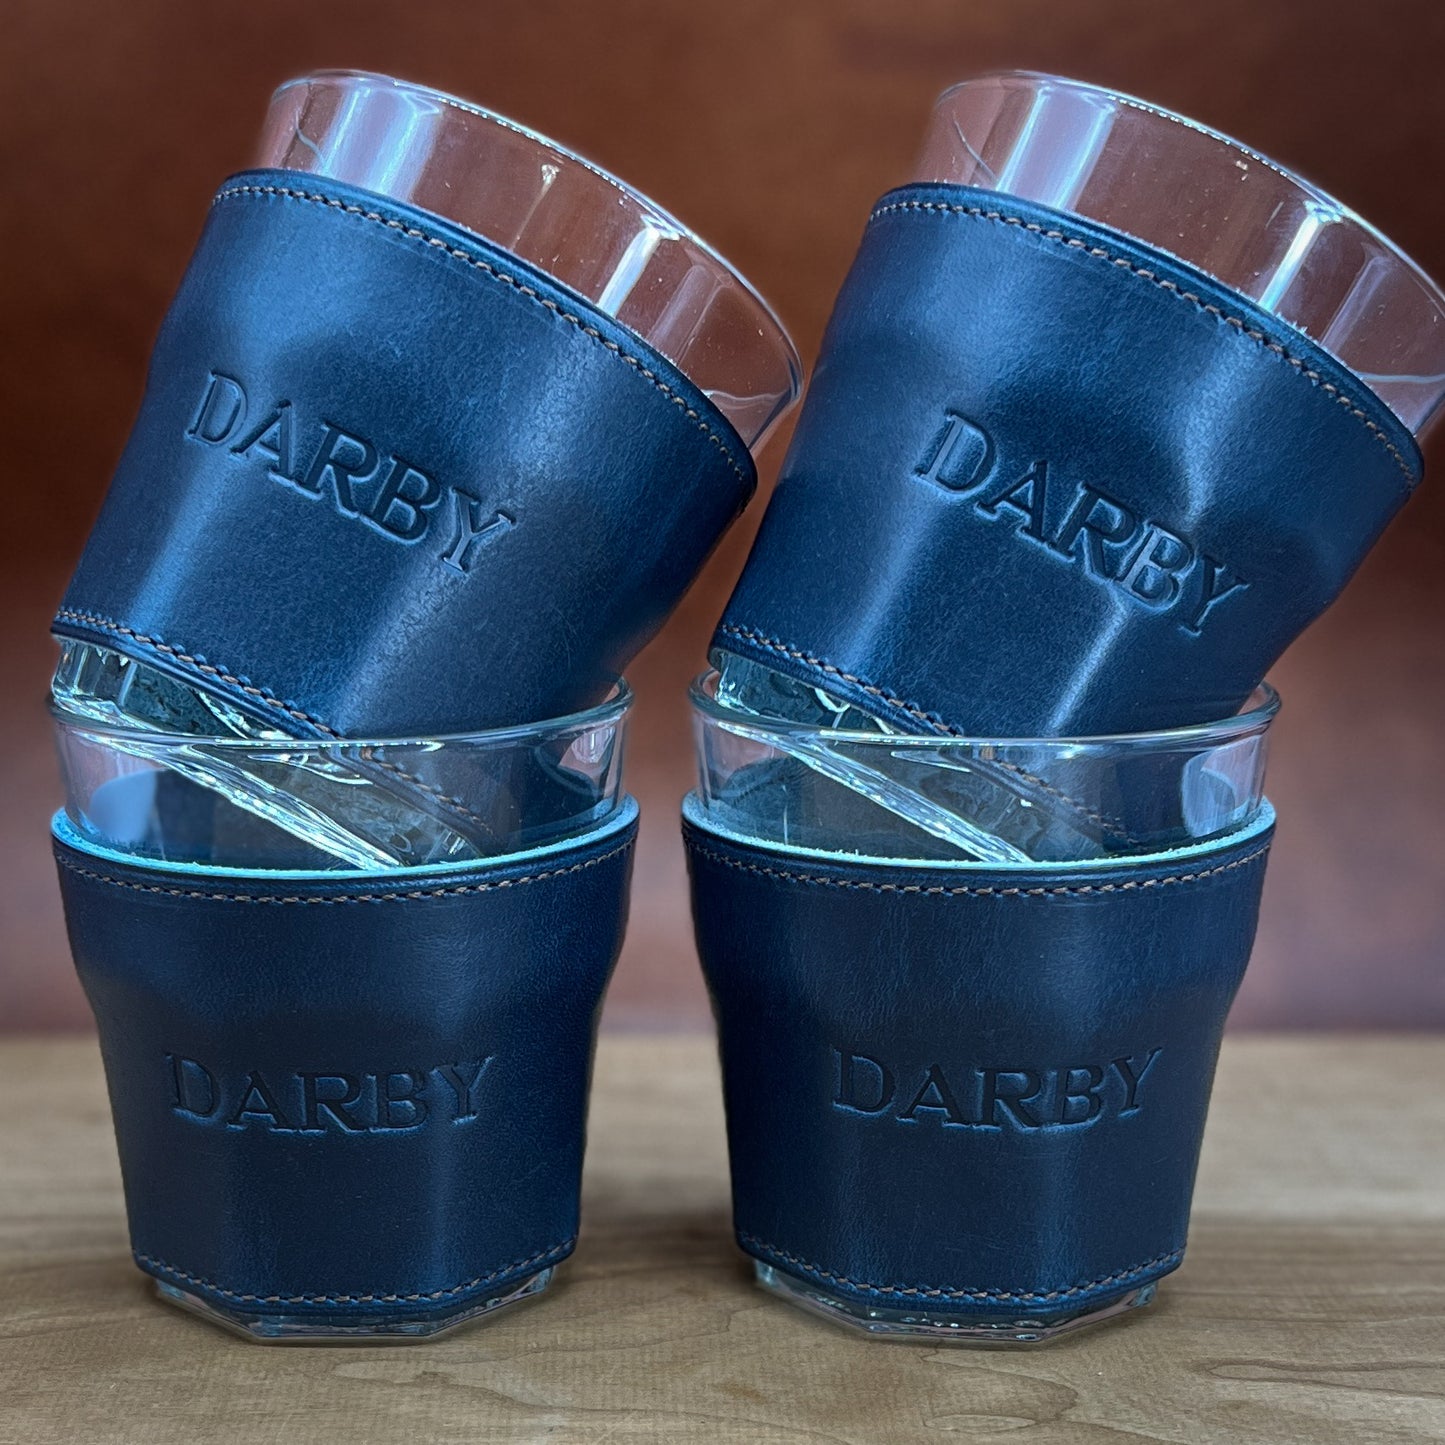 Beautiful Cobalt Blue Horween Leather Whiskey Glasses with Brown Accent Stitching in font A36.